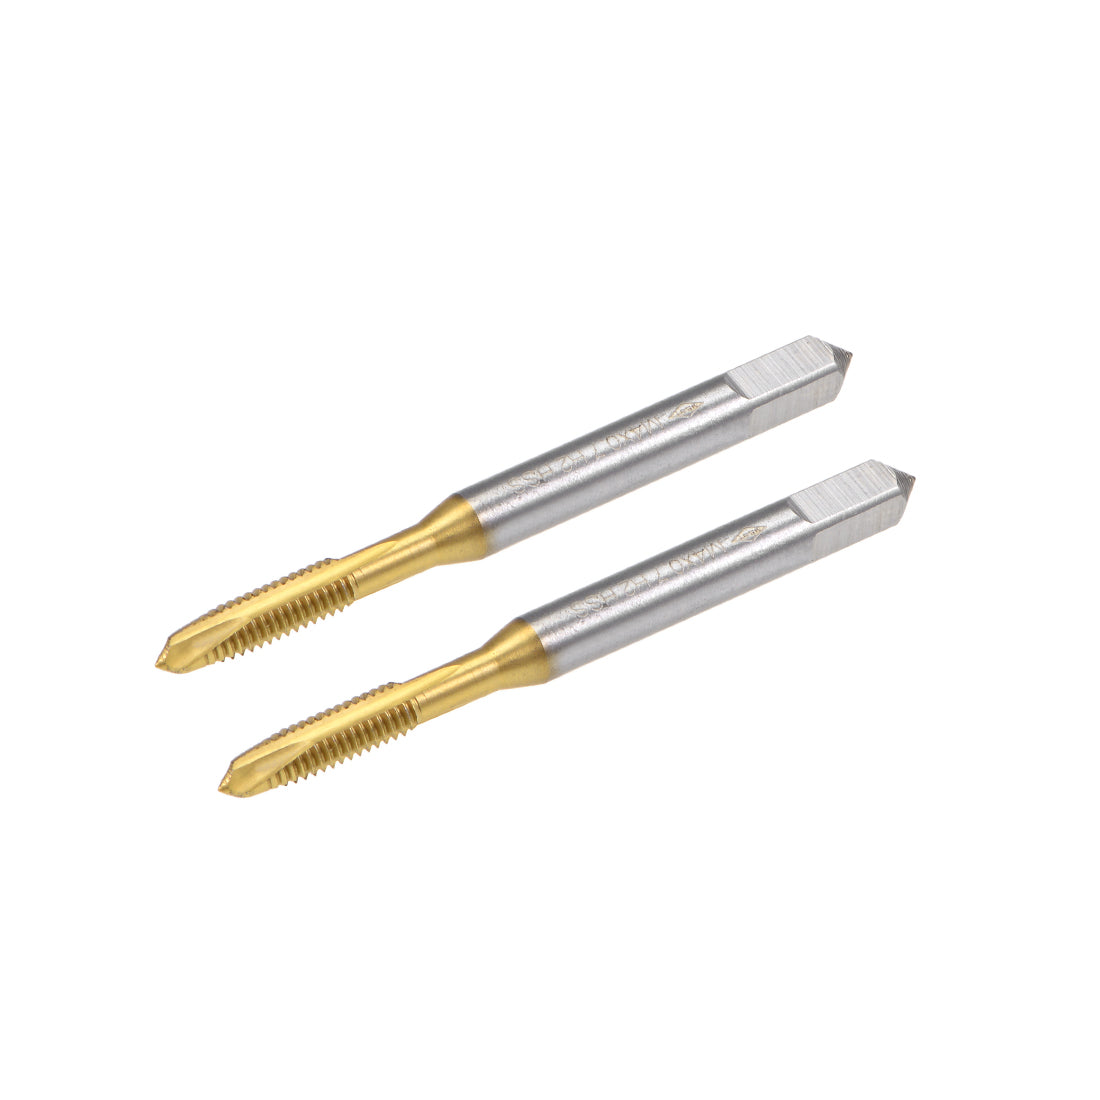 uxcell Uxcell Spiral Point Threading Tap M4 Thread 0.7 Pitch Titanium Coated HSS 2pcs